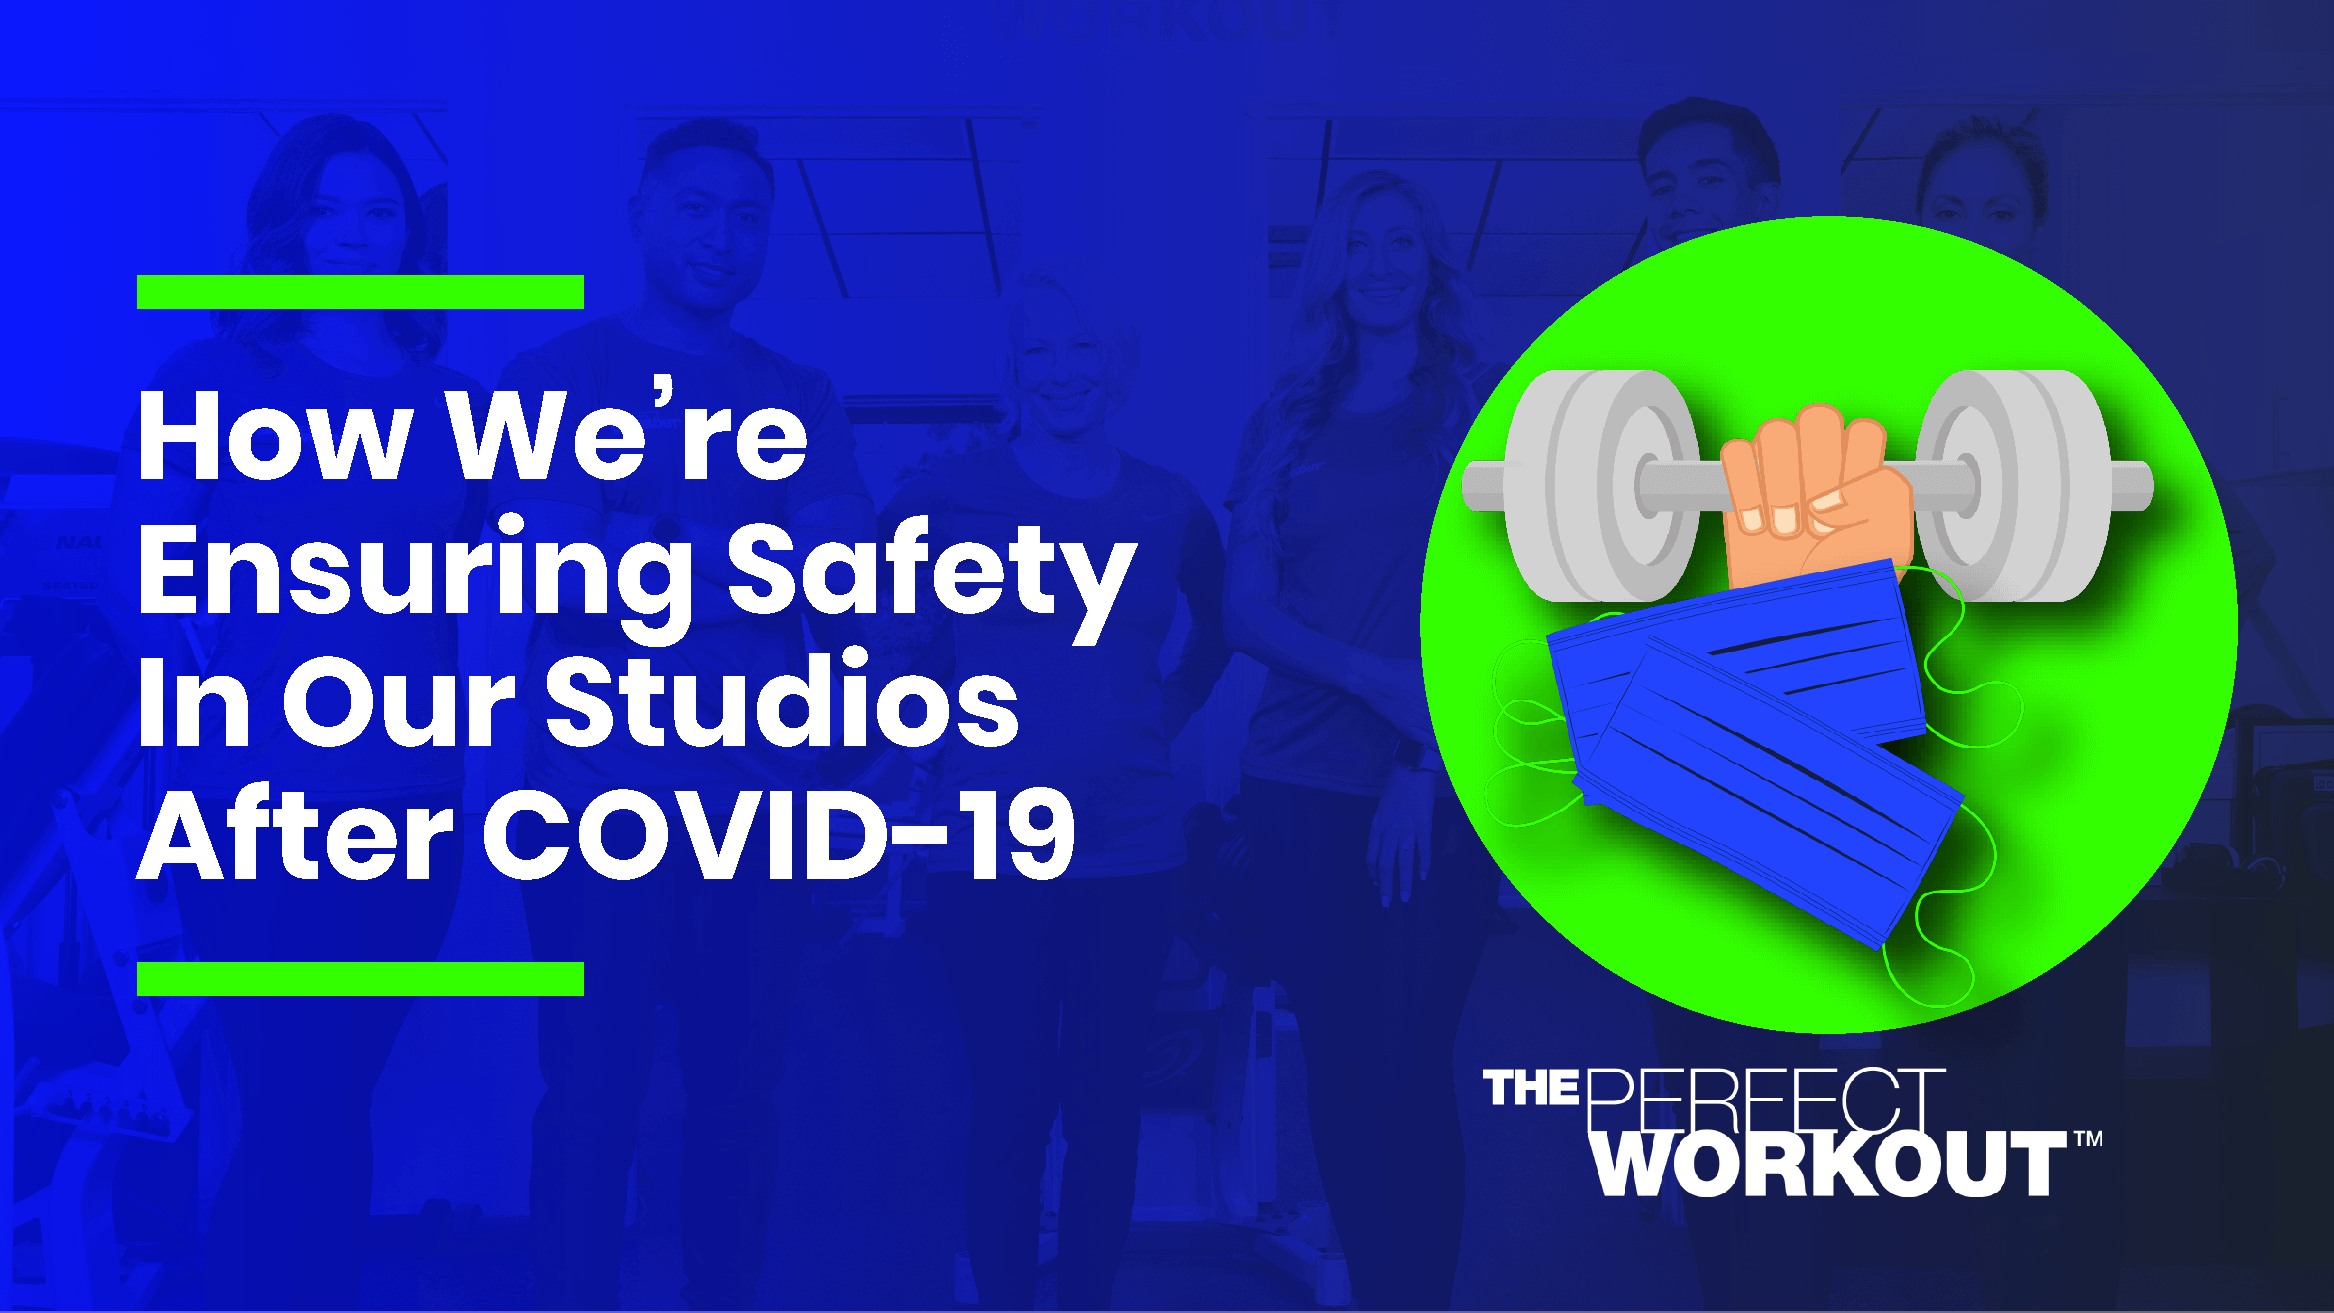 Private Workout Gym: Safety After COVID-19